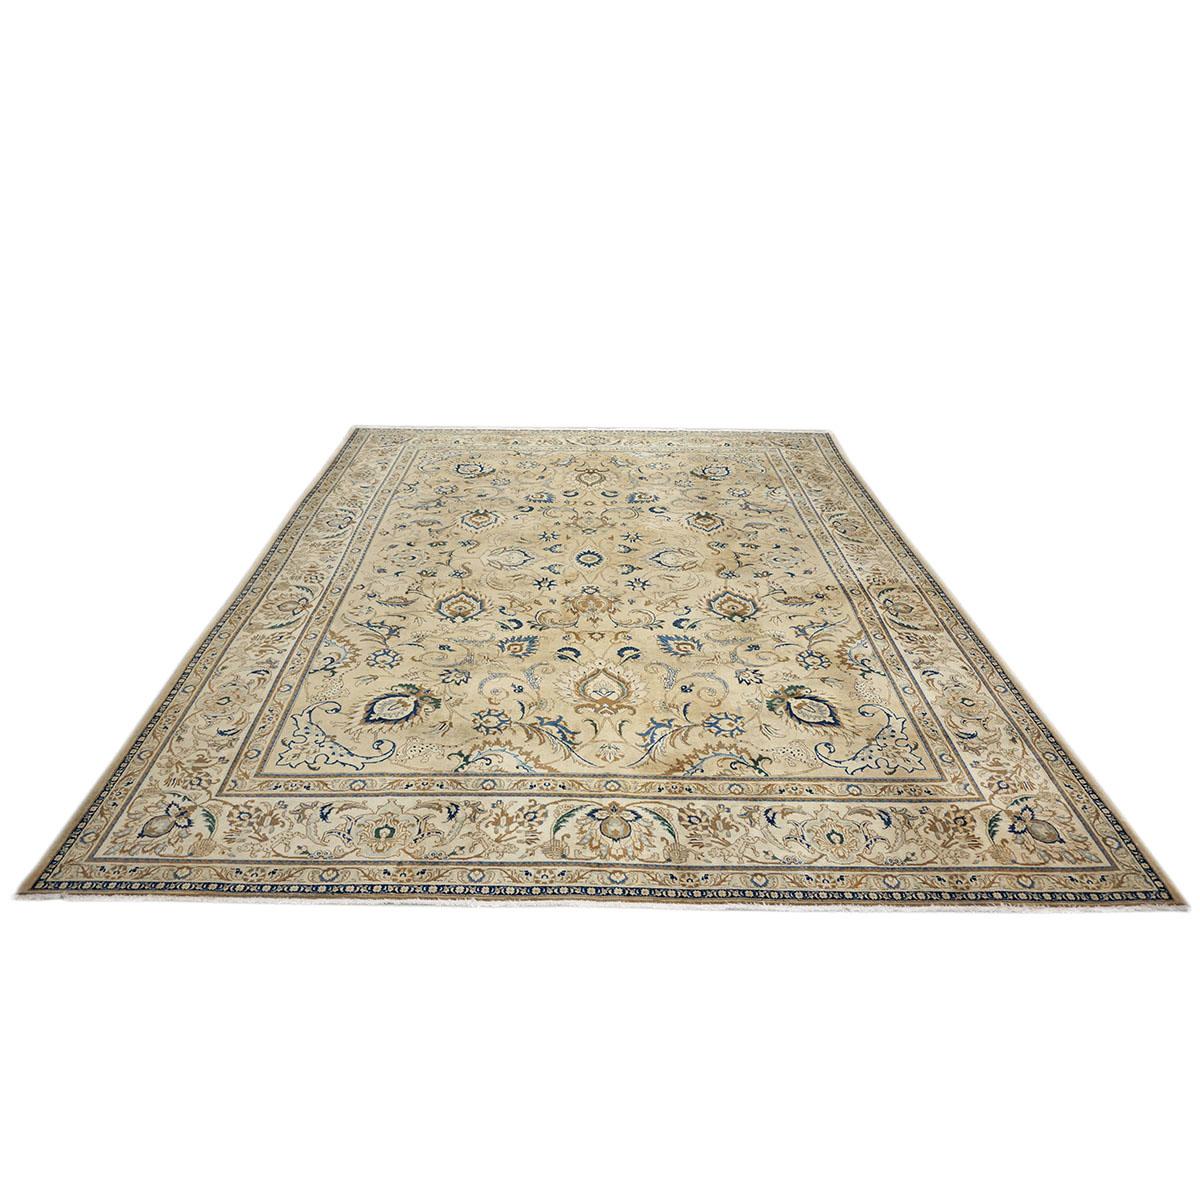 Ashly Fine Rugs presents a wonderful Antique Persian Tabriz from the 1920s. Tabriz is a northern city in modern-day Iran and has forever been famous for the fineness of its handmade rugs. This piece has a tan background with the design, border, and